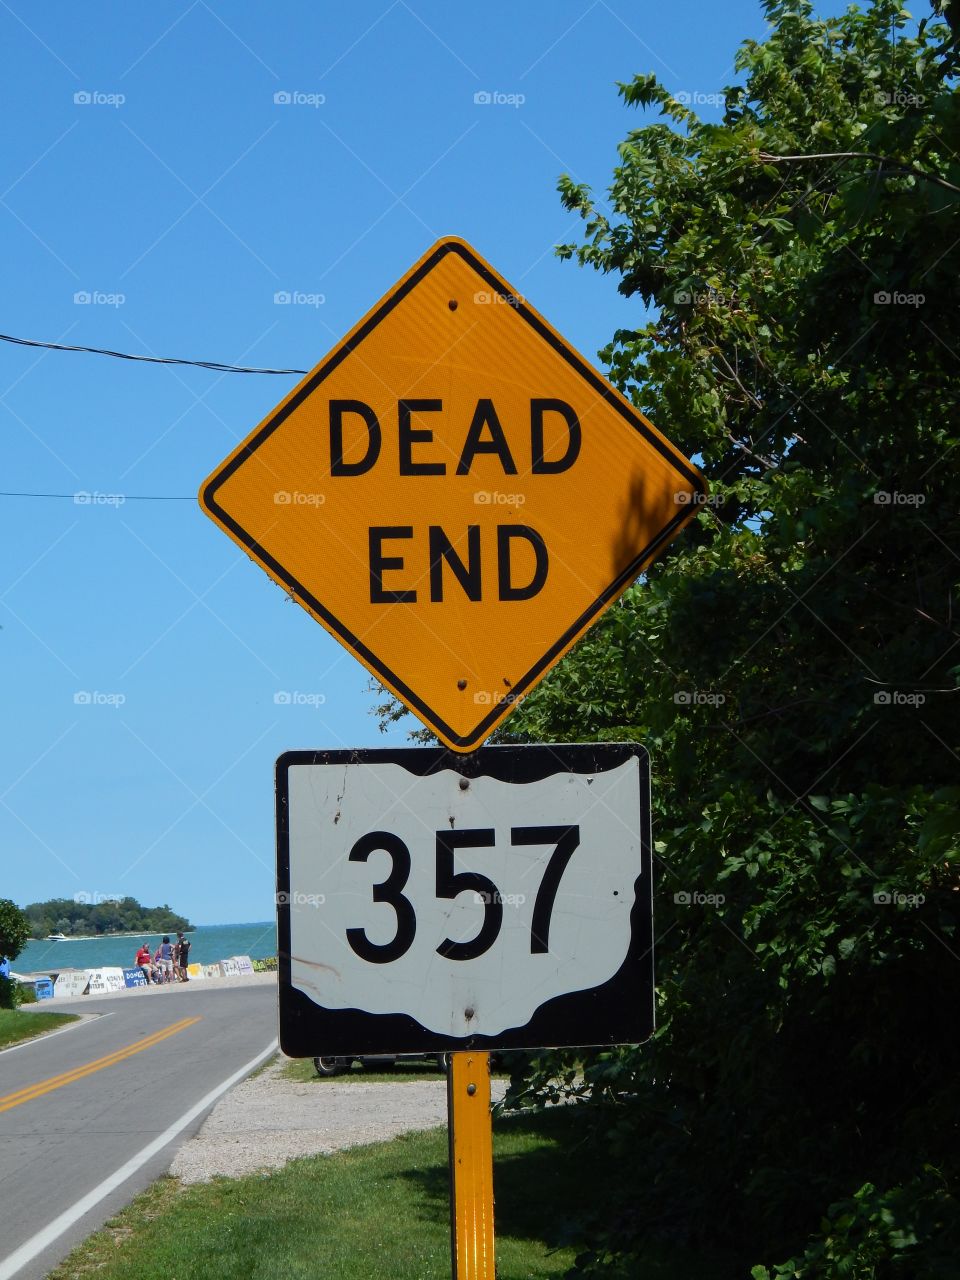 Magnum. Route 357 ends in a dead end. Kind of what can happen if you're on the wrong end of a Magnum 357